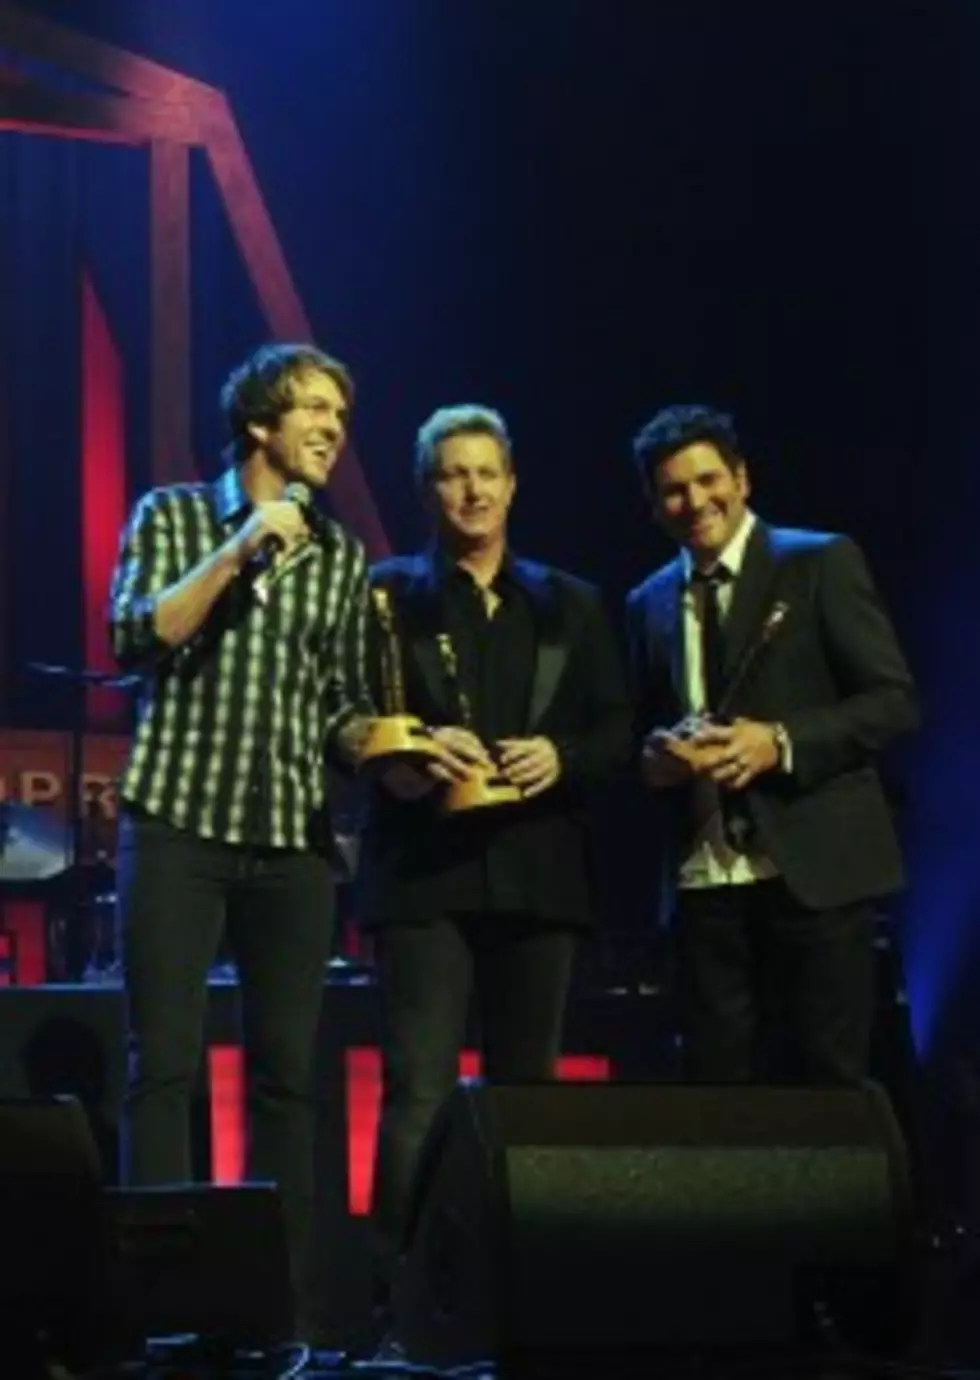 New Year Means New Music from Rascal Flatts